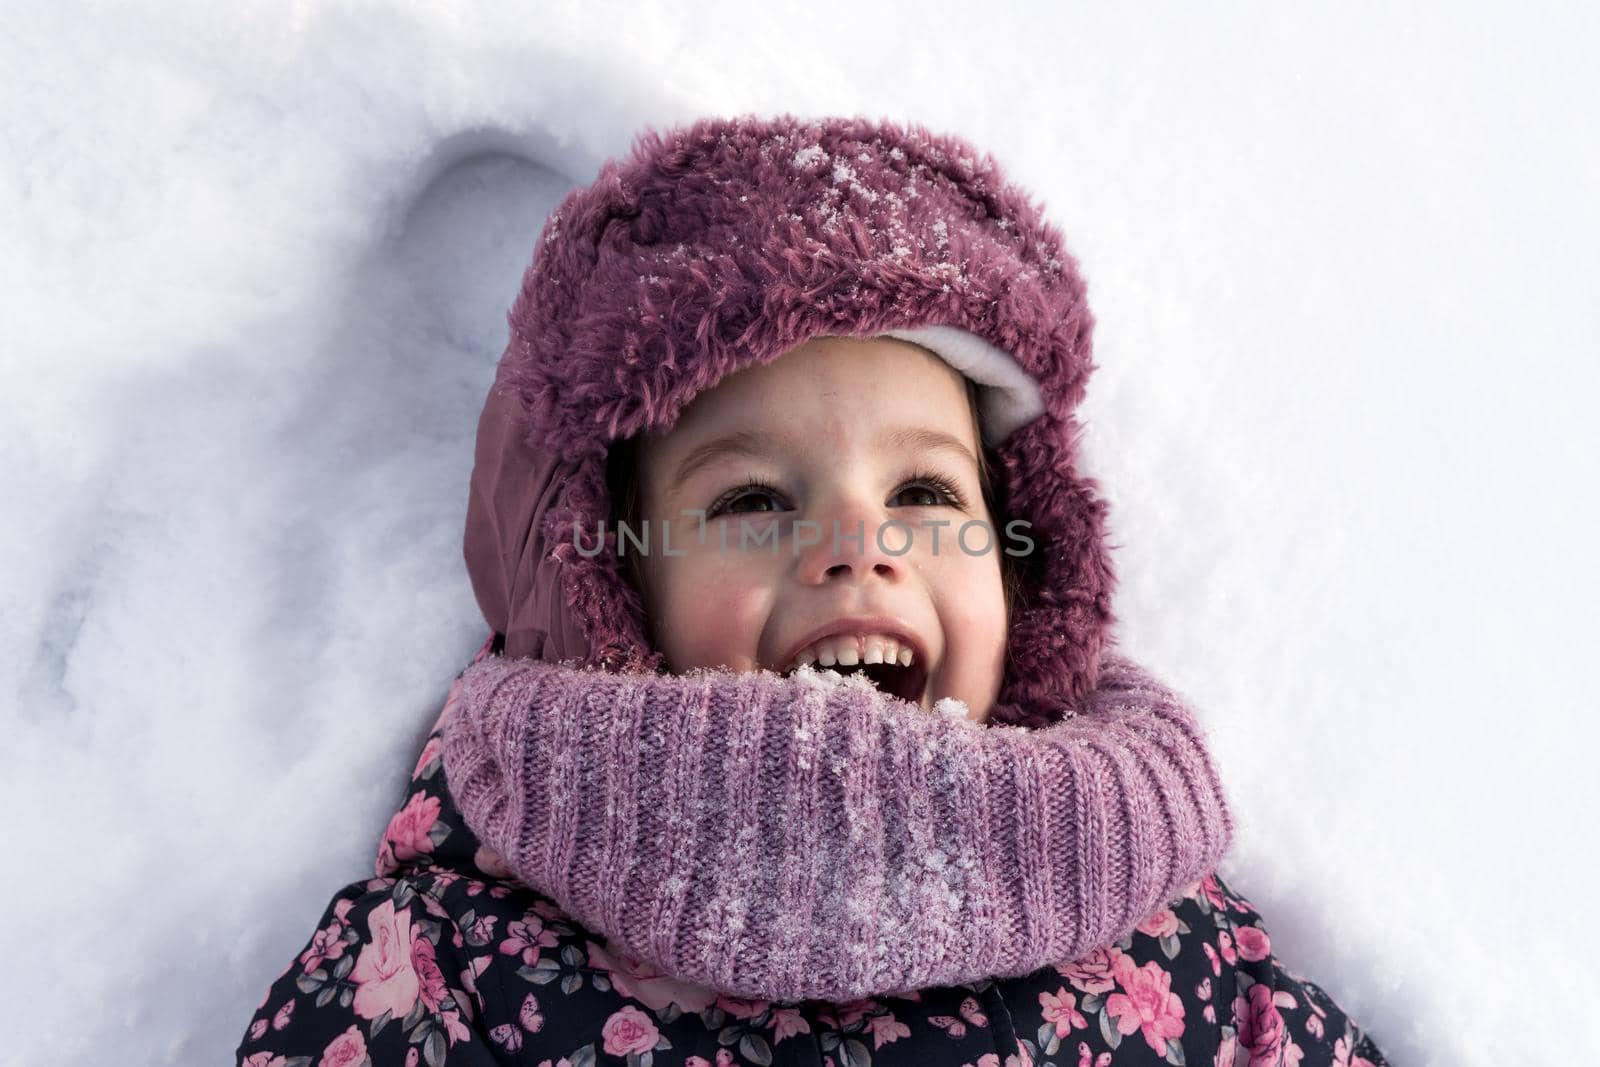 Winter, family, childhood concepts - close-up portrait authentic little preschool girl in pink clothes smile laugh shout with open mouth laying on snow in frosty weather day outdoors. Funny kid face by mytrykau